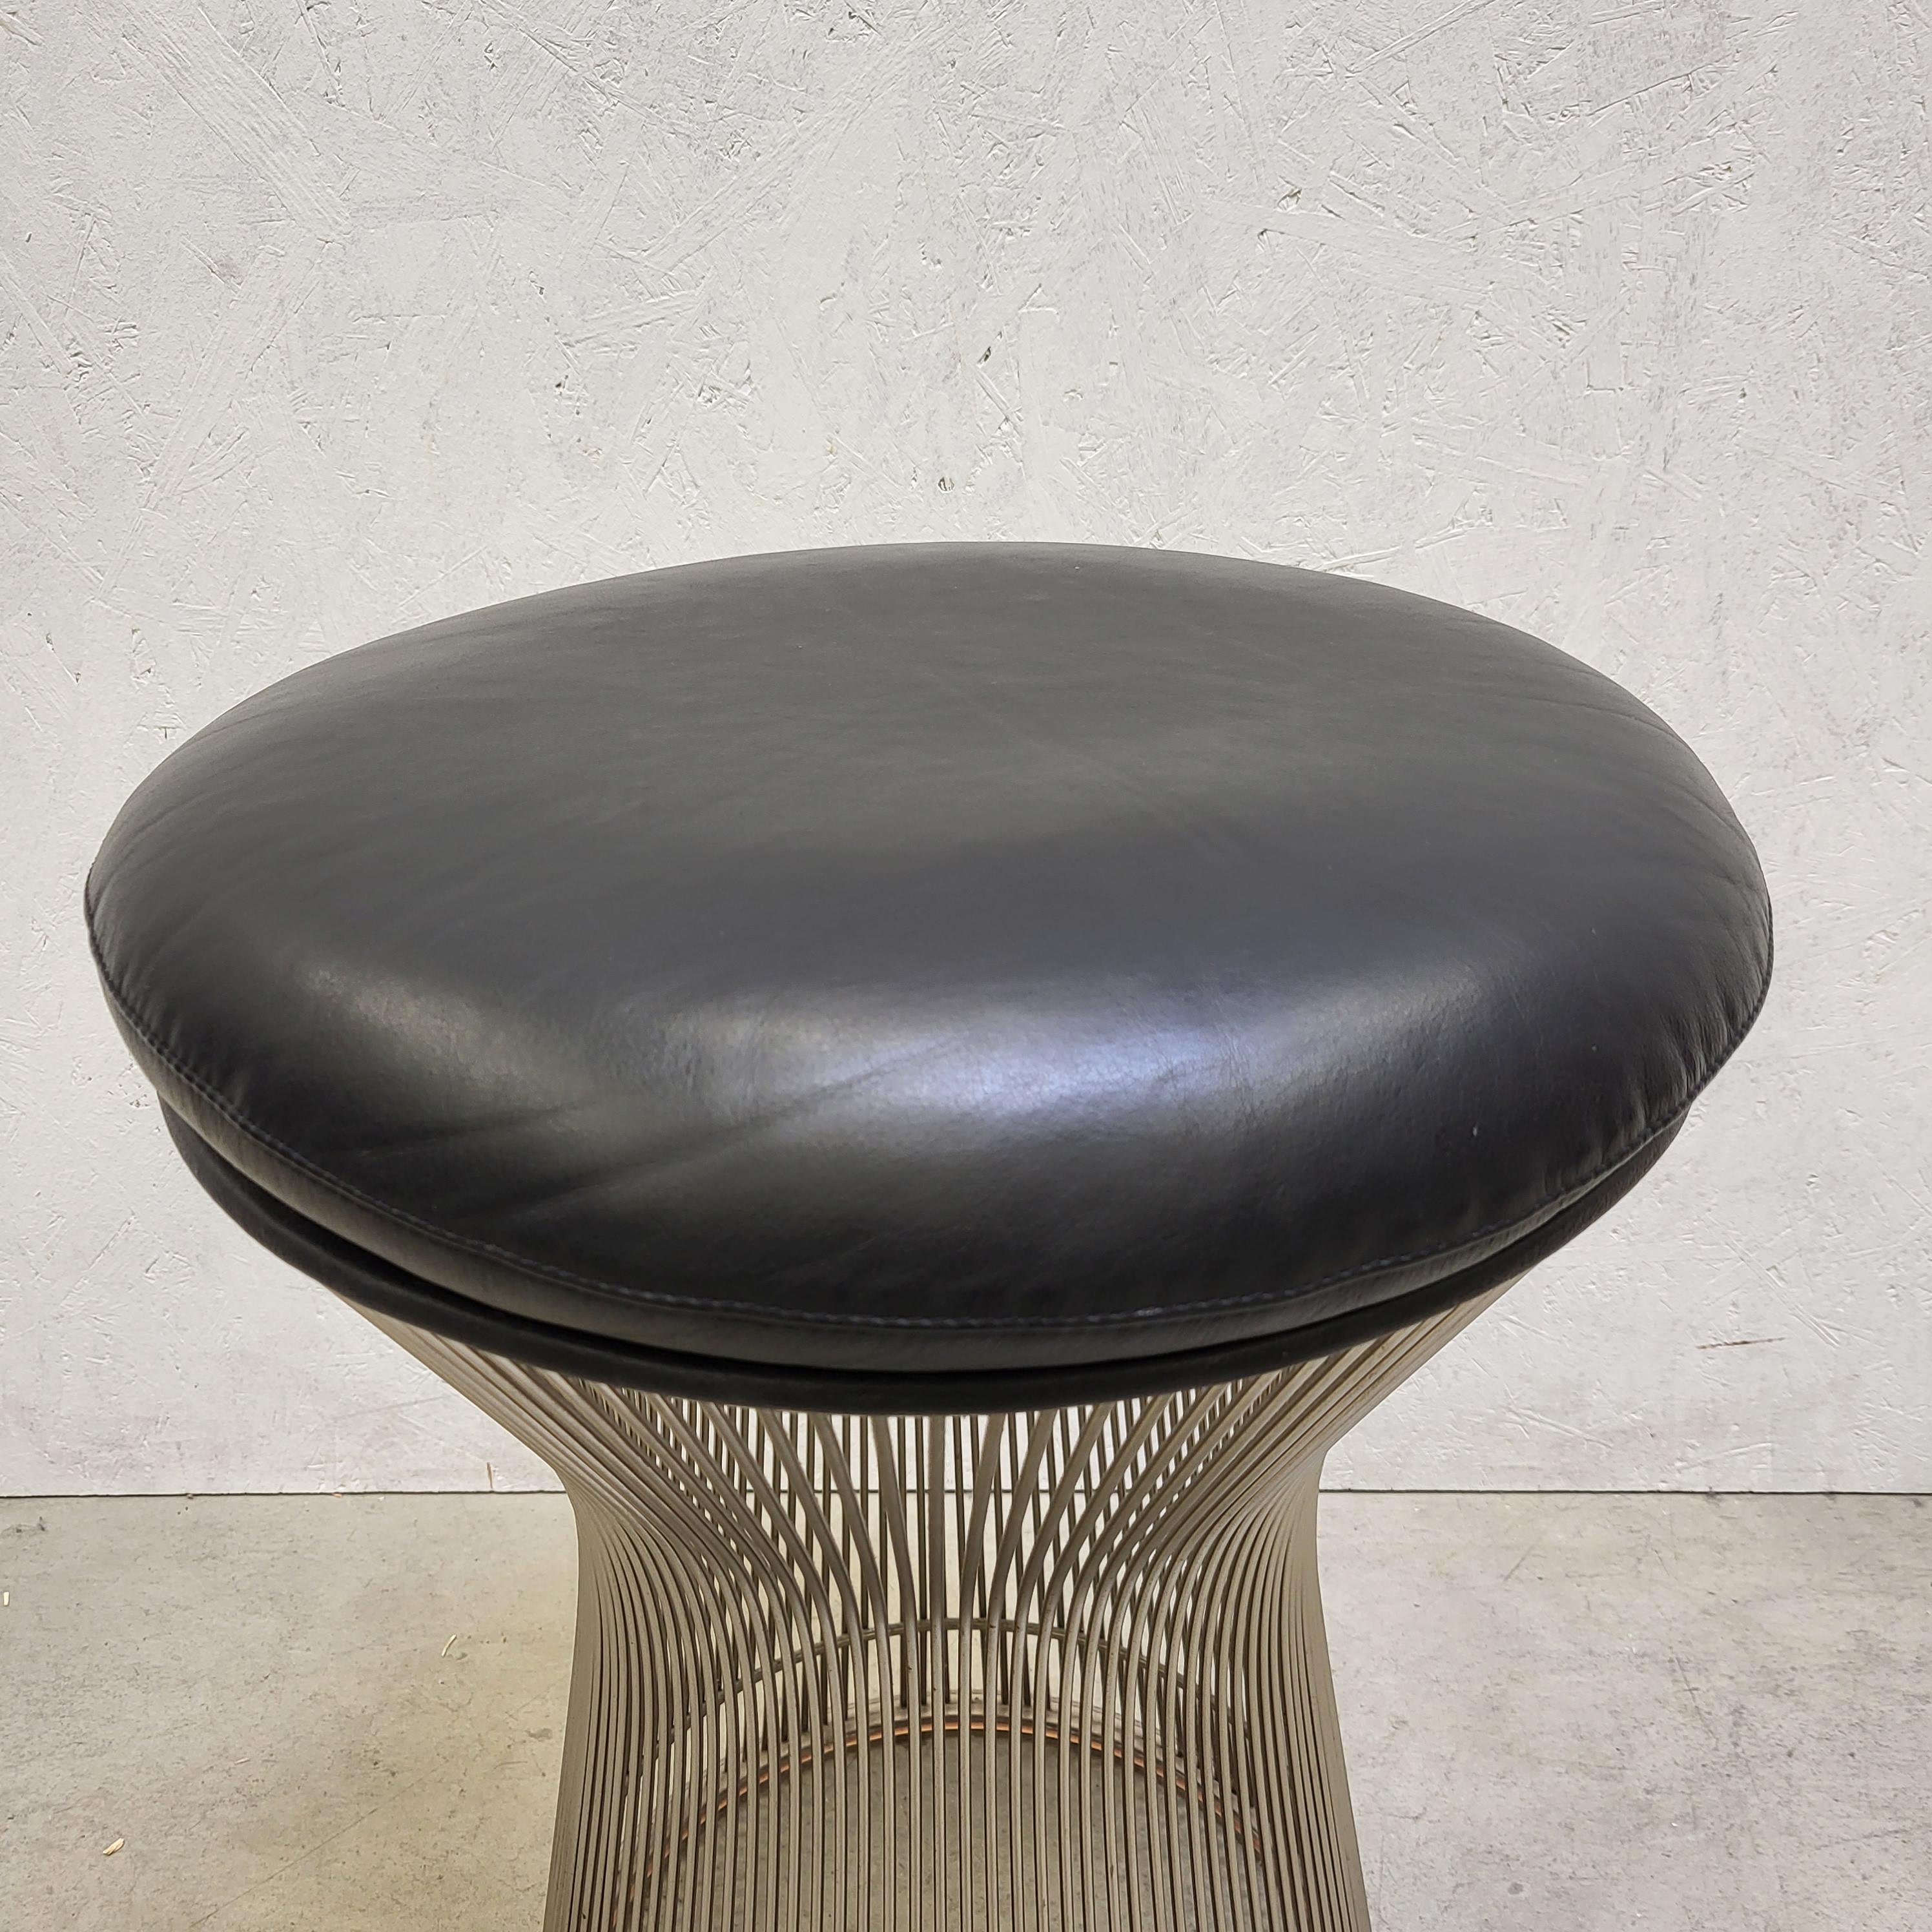 Black leather stool by Warren Platner for Knoll. 

The groundbreaking stool was designed in 1966 by Warren Platner and produced by Knoll after the 2010s.
This mid-century classic supports countless positions and offers a comforting oasis of